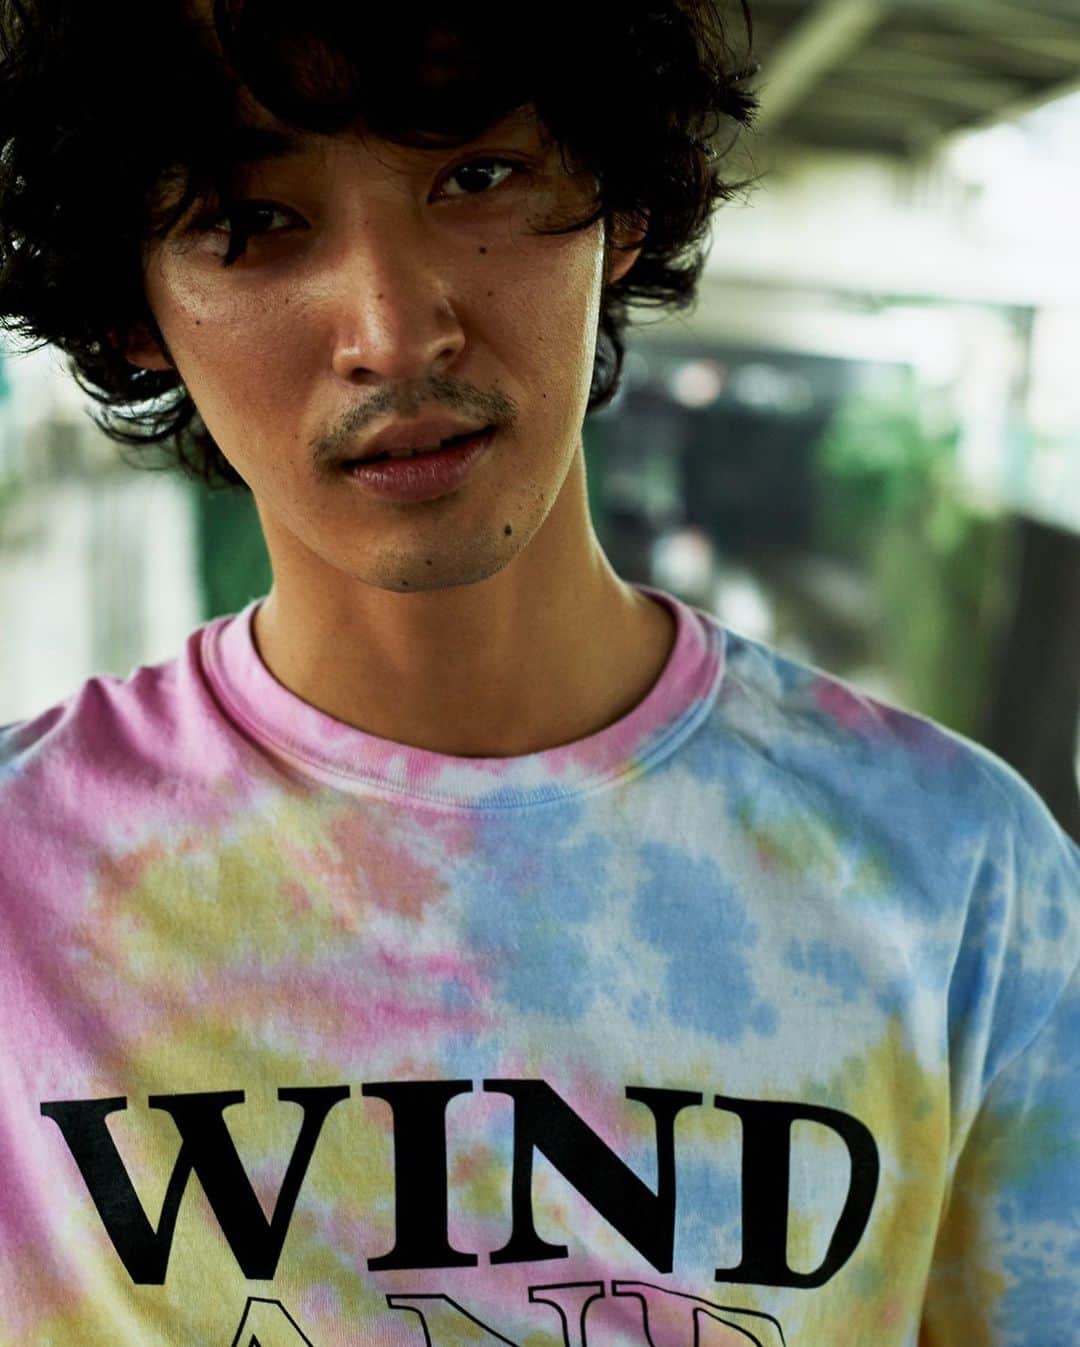 #FR2さんのインスタグラム写真 - (#FR2Instagram)「Starting from Saturday the 11th of July we will begin retail for a range of products from Part 2 of our collaboration project with WIND AND SEA, the label headed by Takashi Kumagai. The line includes 2 T-shirts with bold designs featuring both parties' brand names, as well 8 other items. These will be available for purchase at #FR2's company store, as well at the online stores of both brands. The product line features a summery tie-dye T-shirt, as well as a bucket hat, a face towel, sandals, and a number of other seasonal items, each featuring a limited edition design of our rabbit icon made for the collaboration. (*) Sizes M / L / XL will be sold at #FR2     熊谷隆志氏がクリエイティブディレクターを務めるWIND AND SEAとの第２弾コラボレーションアイテムを7月11日(土)から発売致します。 双方のブランドネームを大胆にプリントしたTシャツ2型と雑貨類の計8型です。 #FR2直営店と両ブランドのONLINE　STOREでお買い求めいただけます。 夏らしいタイダイ柄のＴシャツをはじめ、バケットハット・フェイスタオル・サンダルと季節感のある商品展開で、ウサギのアイコンもコラボ限定仕様となっております。※#FR2では、M / L / XLサイズのみ販売     與由熊谷隆志擔任創意總監之 WIND AND SEA 共同推出之第 2 波合作商品將自 7 月 11 日（六）開始販售。 商品包含大膽地印刷出雙方的品牌名稱的 2 款 T 恤及雜貨類，共計 8 款商品。 上述商品可至 #FR2 直營店及雙方品牌之 ONLINE STORE 購買。 商品陣容以頗具夏日風情的紮染圖案的 T 恤為首，更有漁夫帽、洗臉毛巾、涼鞋等充滿季節感的商品，兔子圖案也更換為本次合作限定之設計。 ※ #FR2 僅販售 M / L / XL 尺寸     与由熊谷隆志担任创意总监的WIND AND SEA的第二弹合作商品将于7月11日（周六）发售。 此次推出大胆印有双方品牌名称的2款T恤衫和8款杂货类商品。 可在#FR2直营店和两个品牌的线上商店购买。 产品富有季节感，既有充满夏日风格的扎染图案T恤衫、也有渔夫帽、面巾、凉鞋等，兔子图标也是合作限量版。 ※在#FR2仅销售M / L / XL尺码    #windandsea#windandfr2#fr2andwind #上杉柊平#fxxkingrabbits#FR2#頭狂色情兎」7月8日 19時57分 - fxxkingrabbits